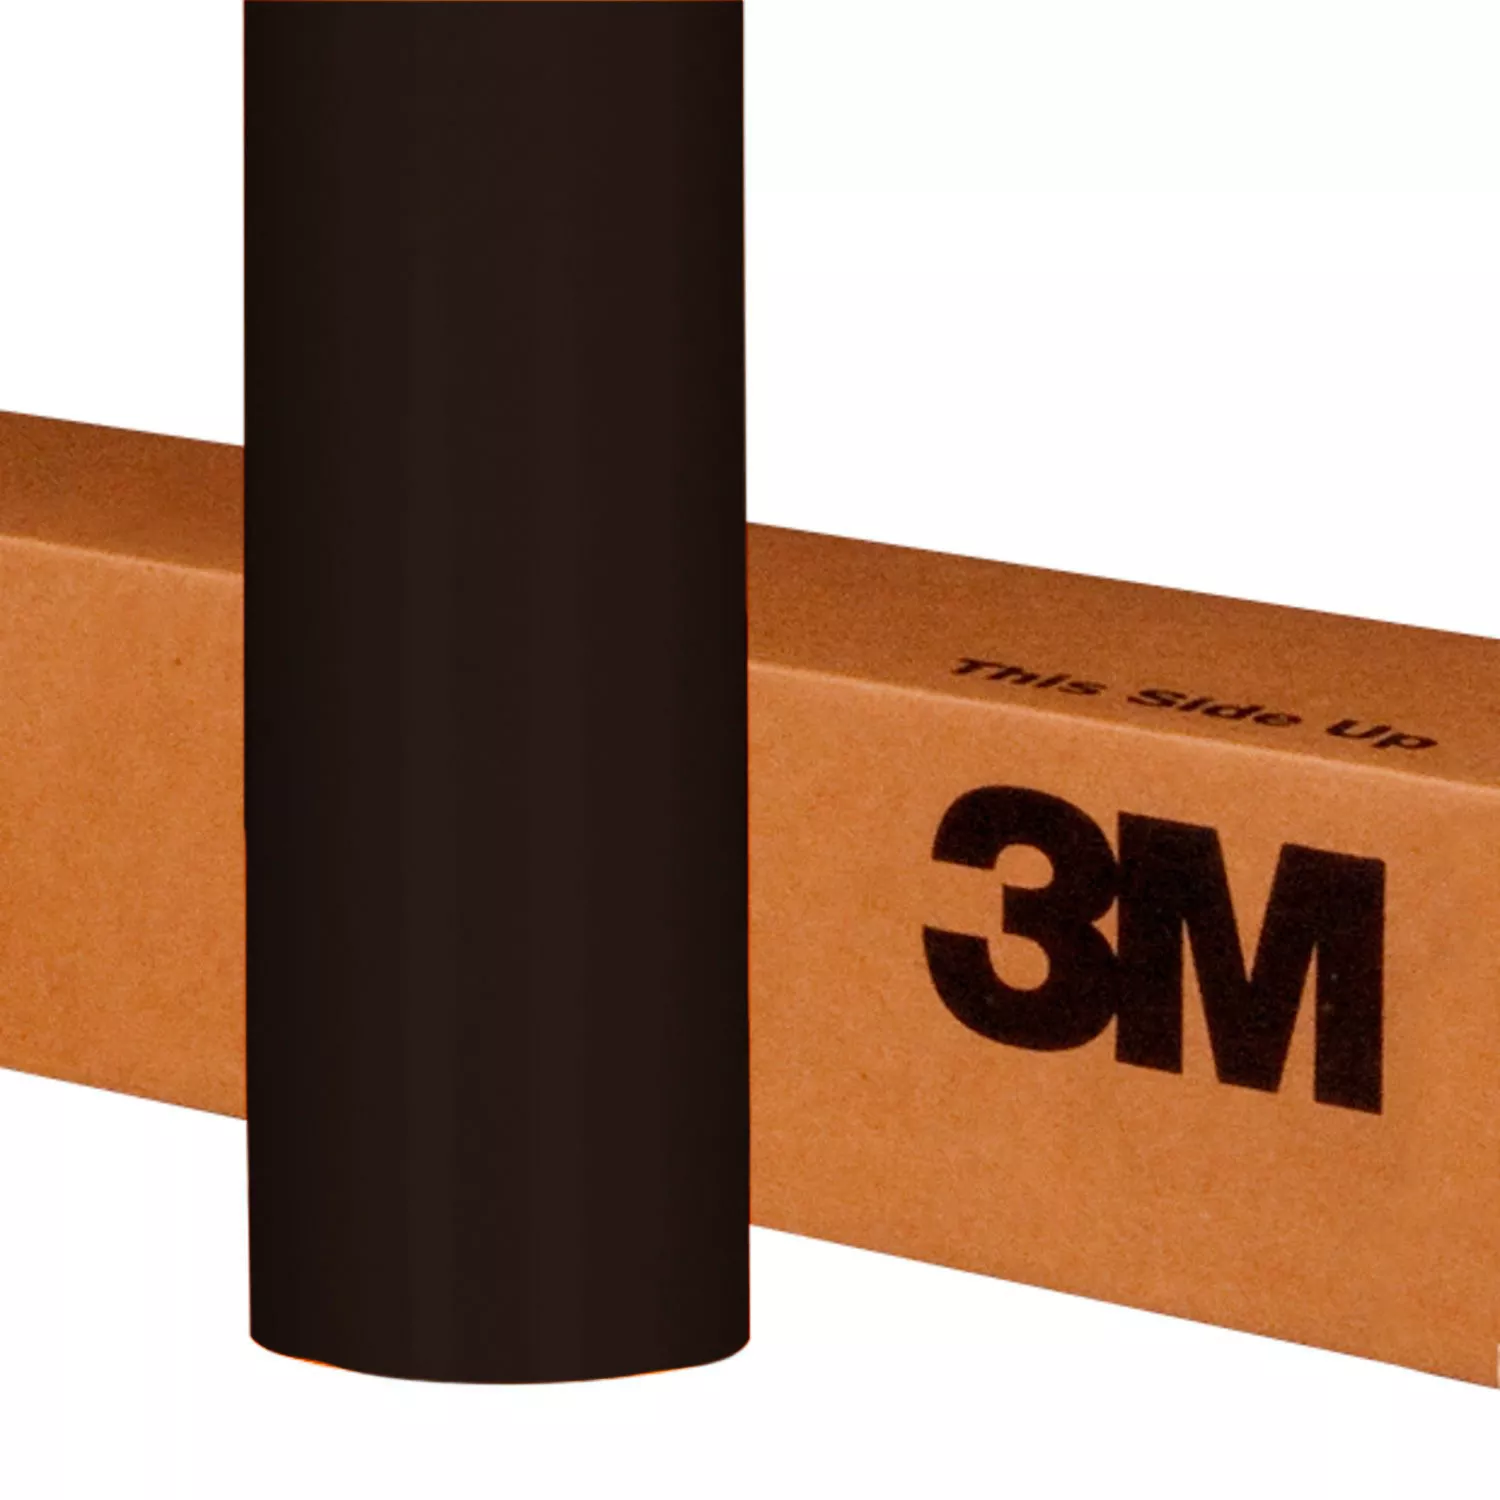 3M™ Scotchcal™ ElectroCut™ Graphic Film 7725-69, Duranodic, 48 in x 50
yd